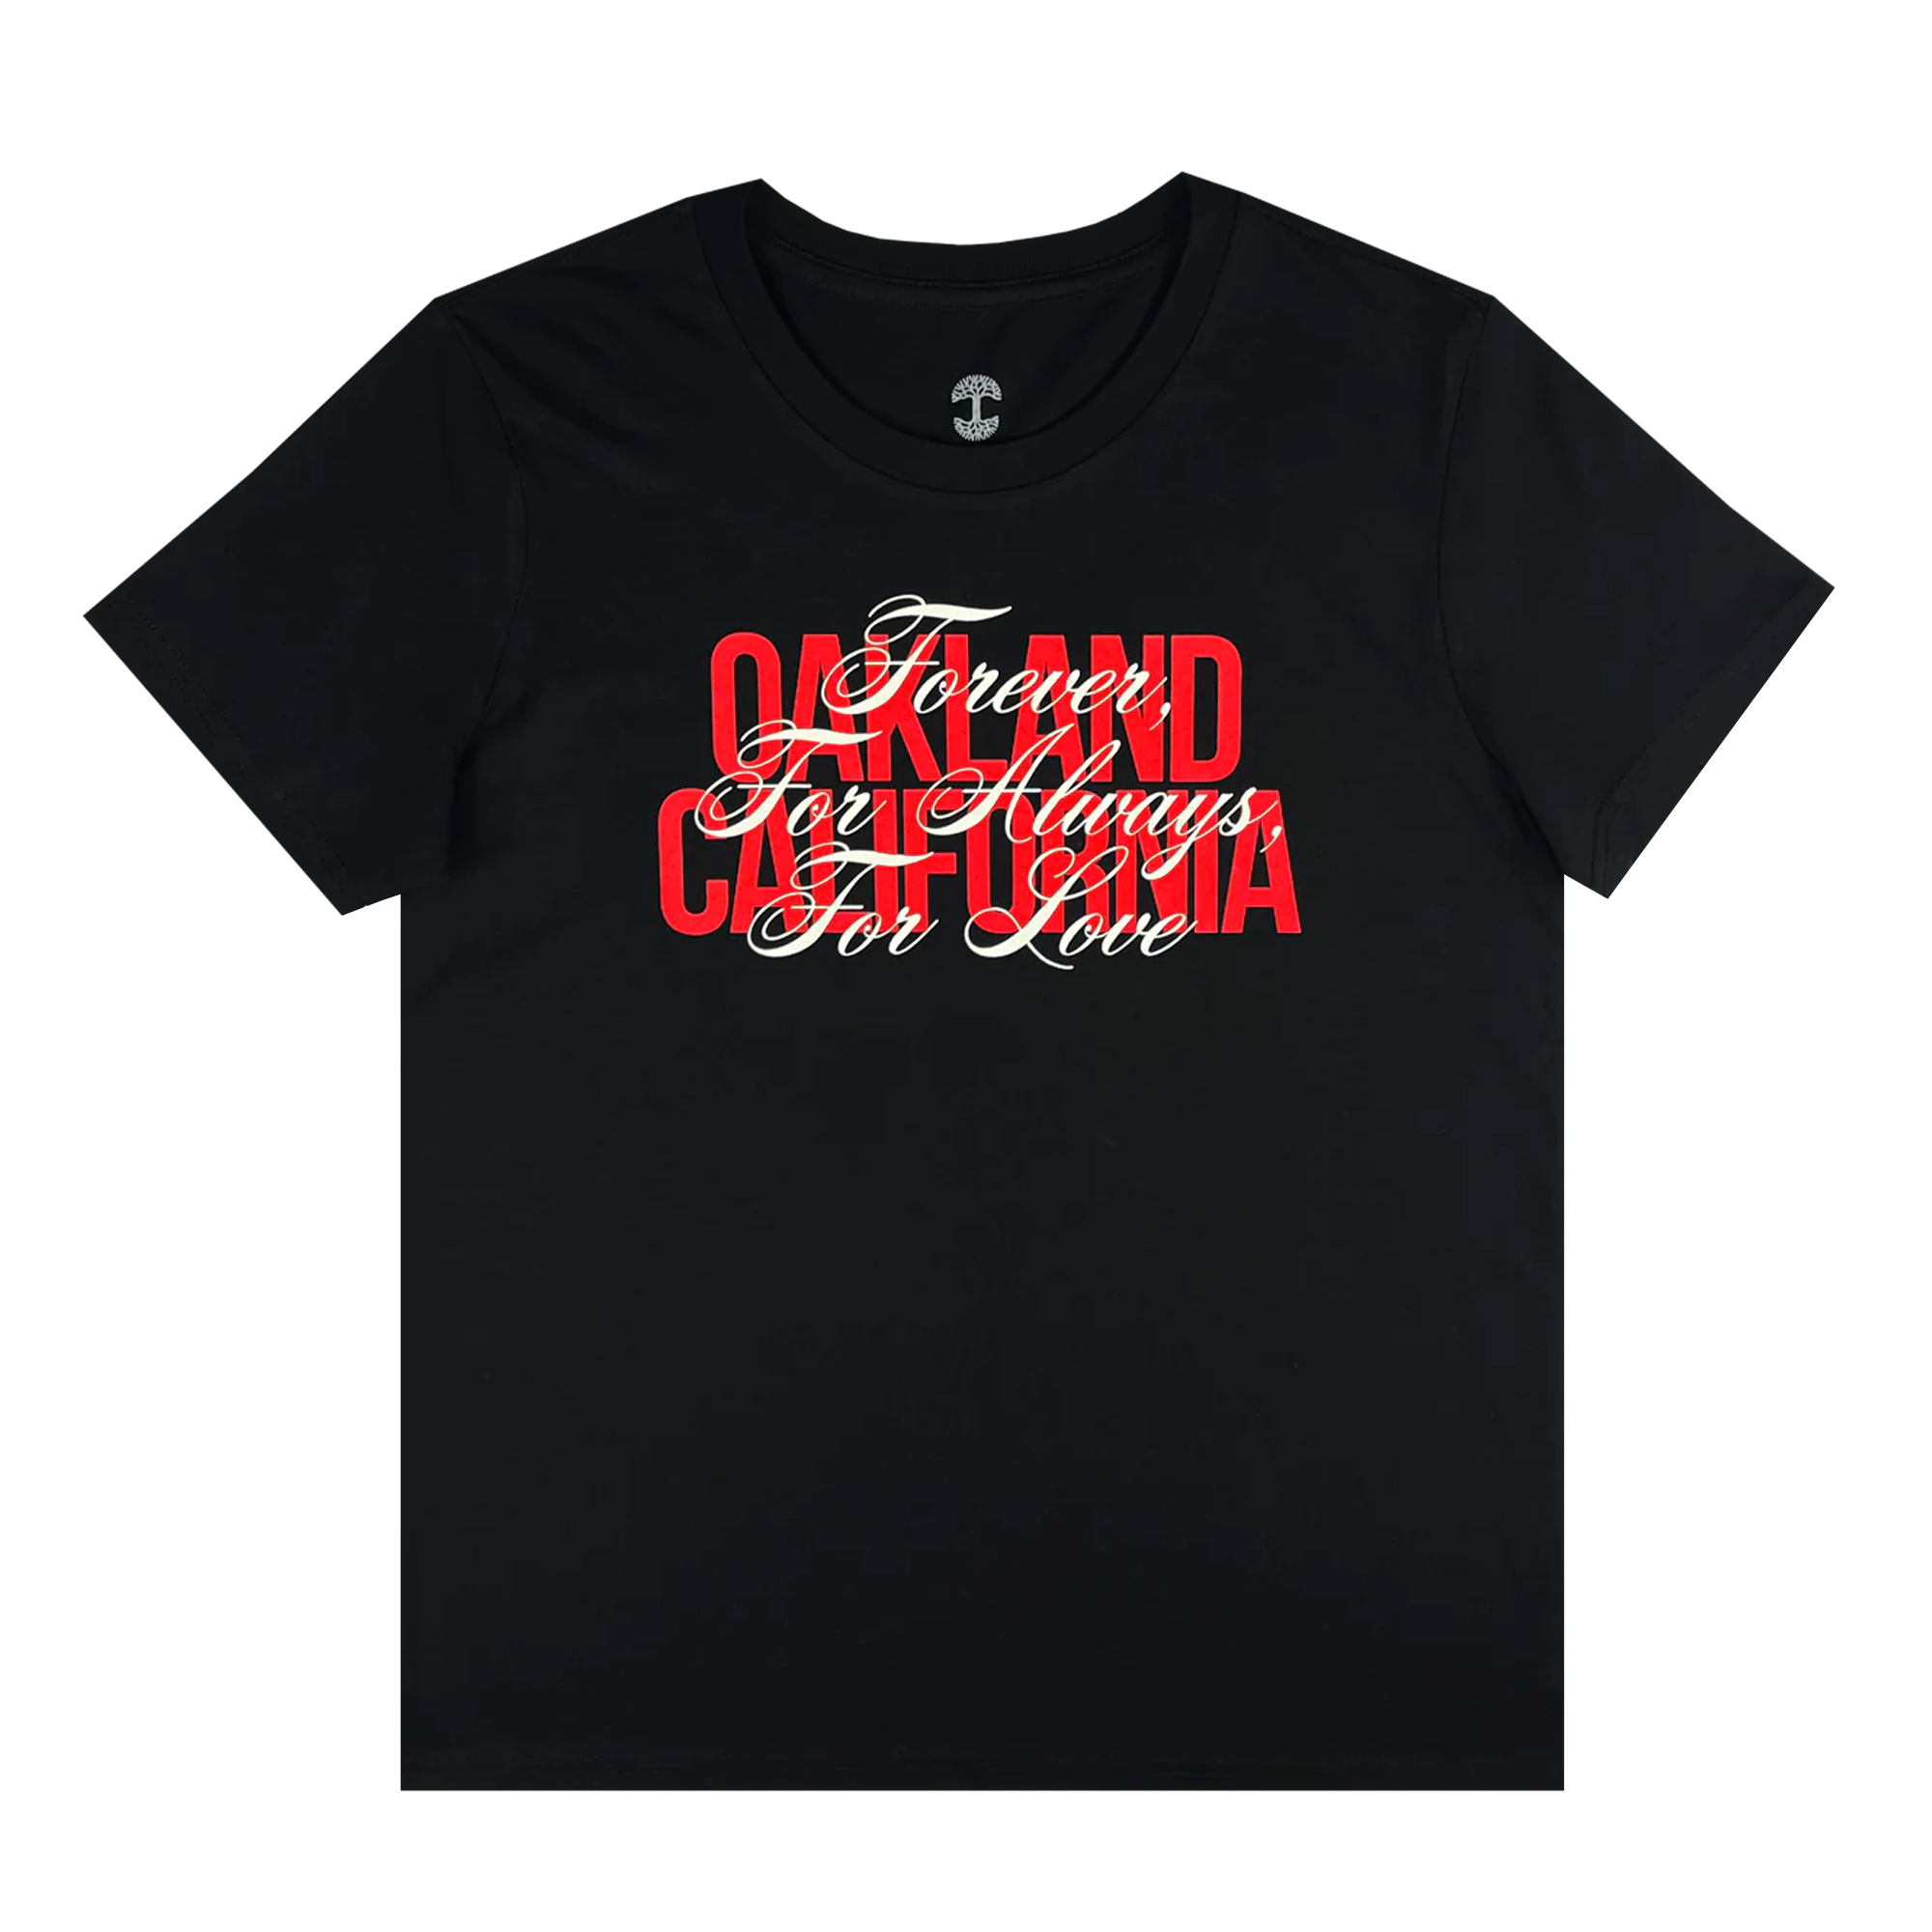 Women’s black t-shirt with OAKLAND CALIFORNIA wordmark in red with white Forever. For Always. For Love in script on top.